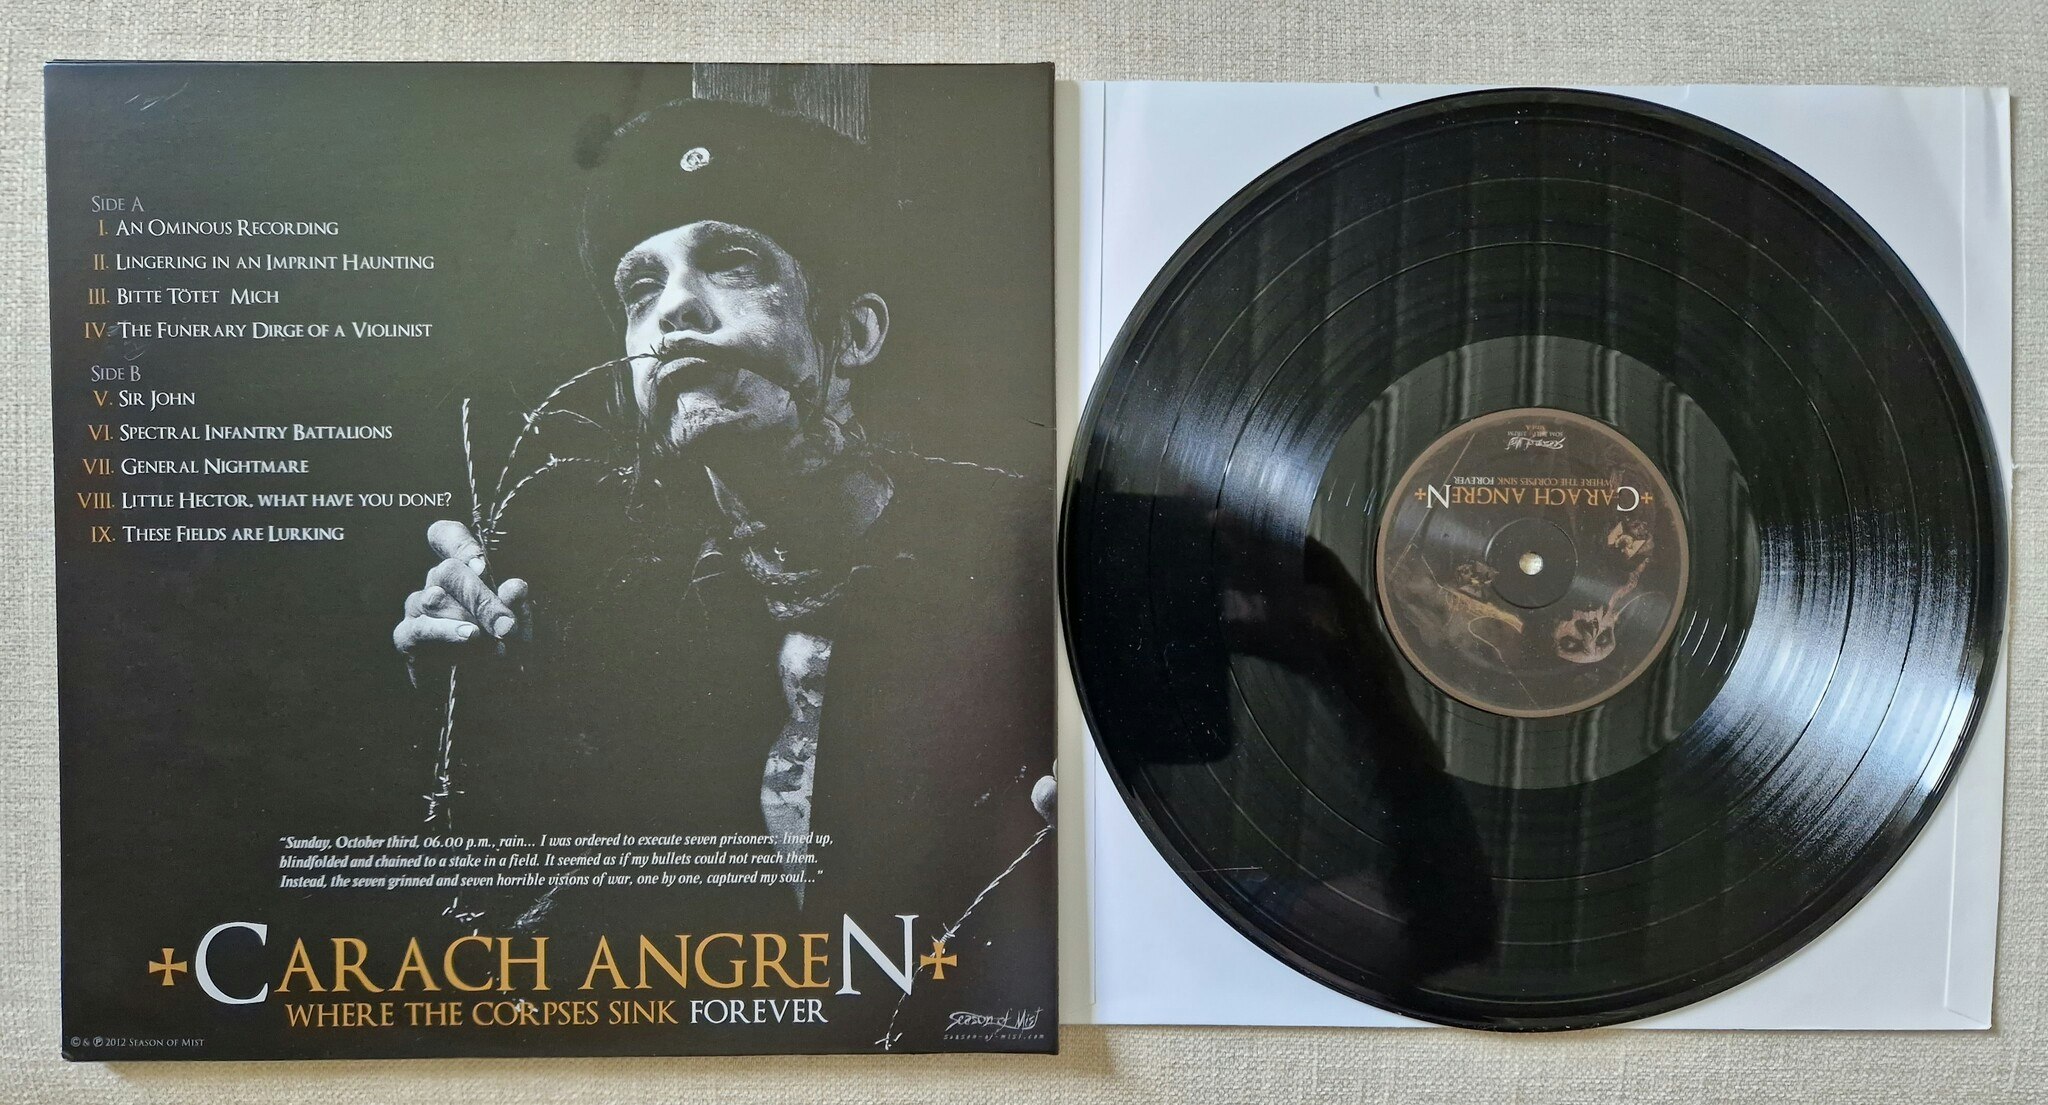 Carach Angren, Where the corpses sink forever. Vinyl LP